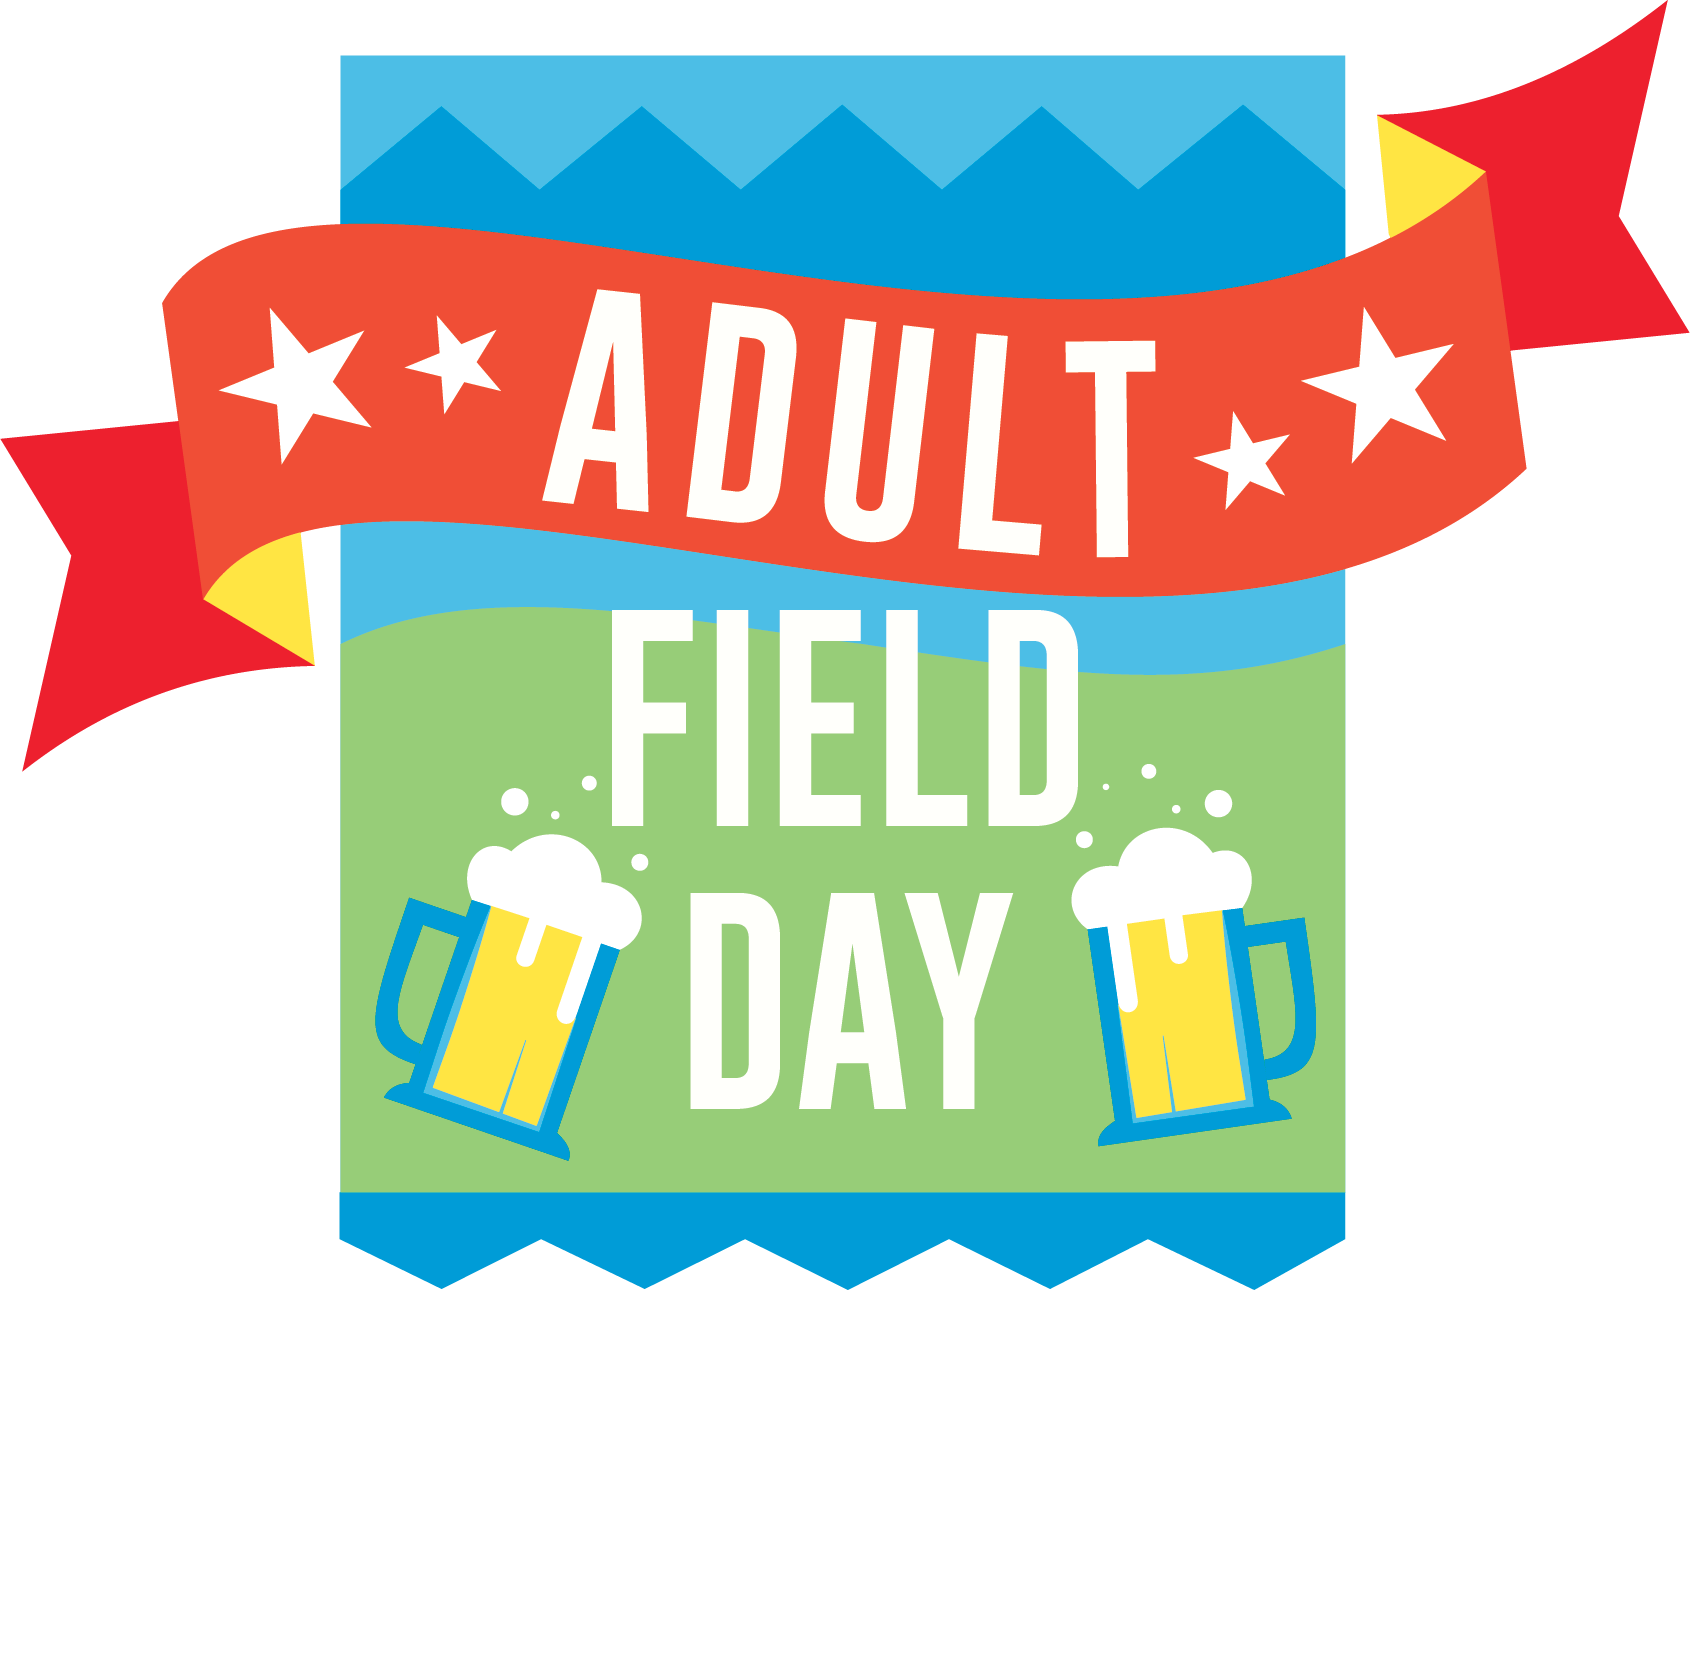 ADULT FIELD DAY